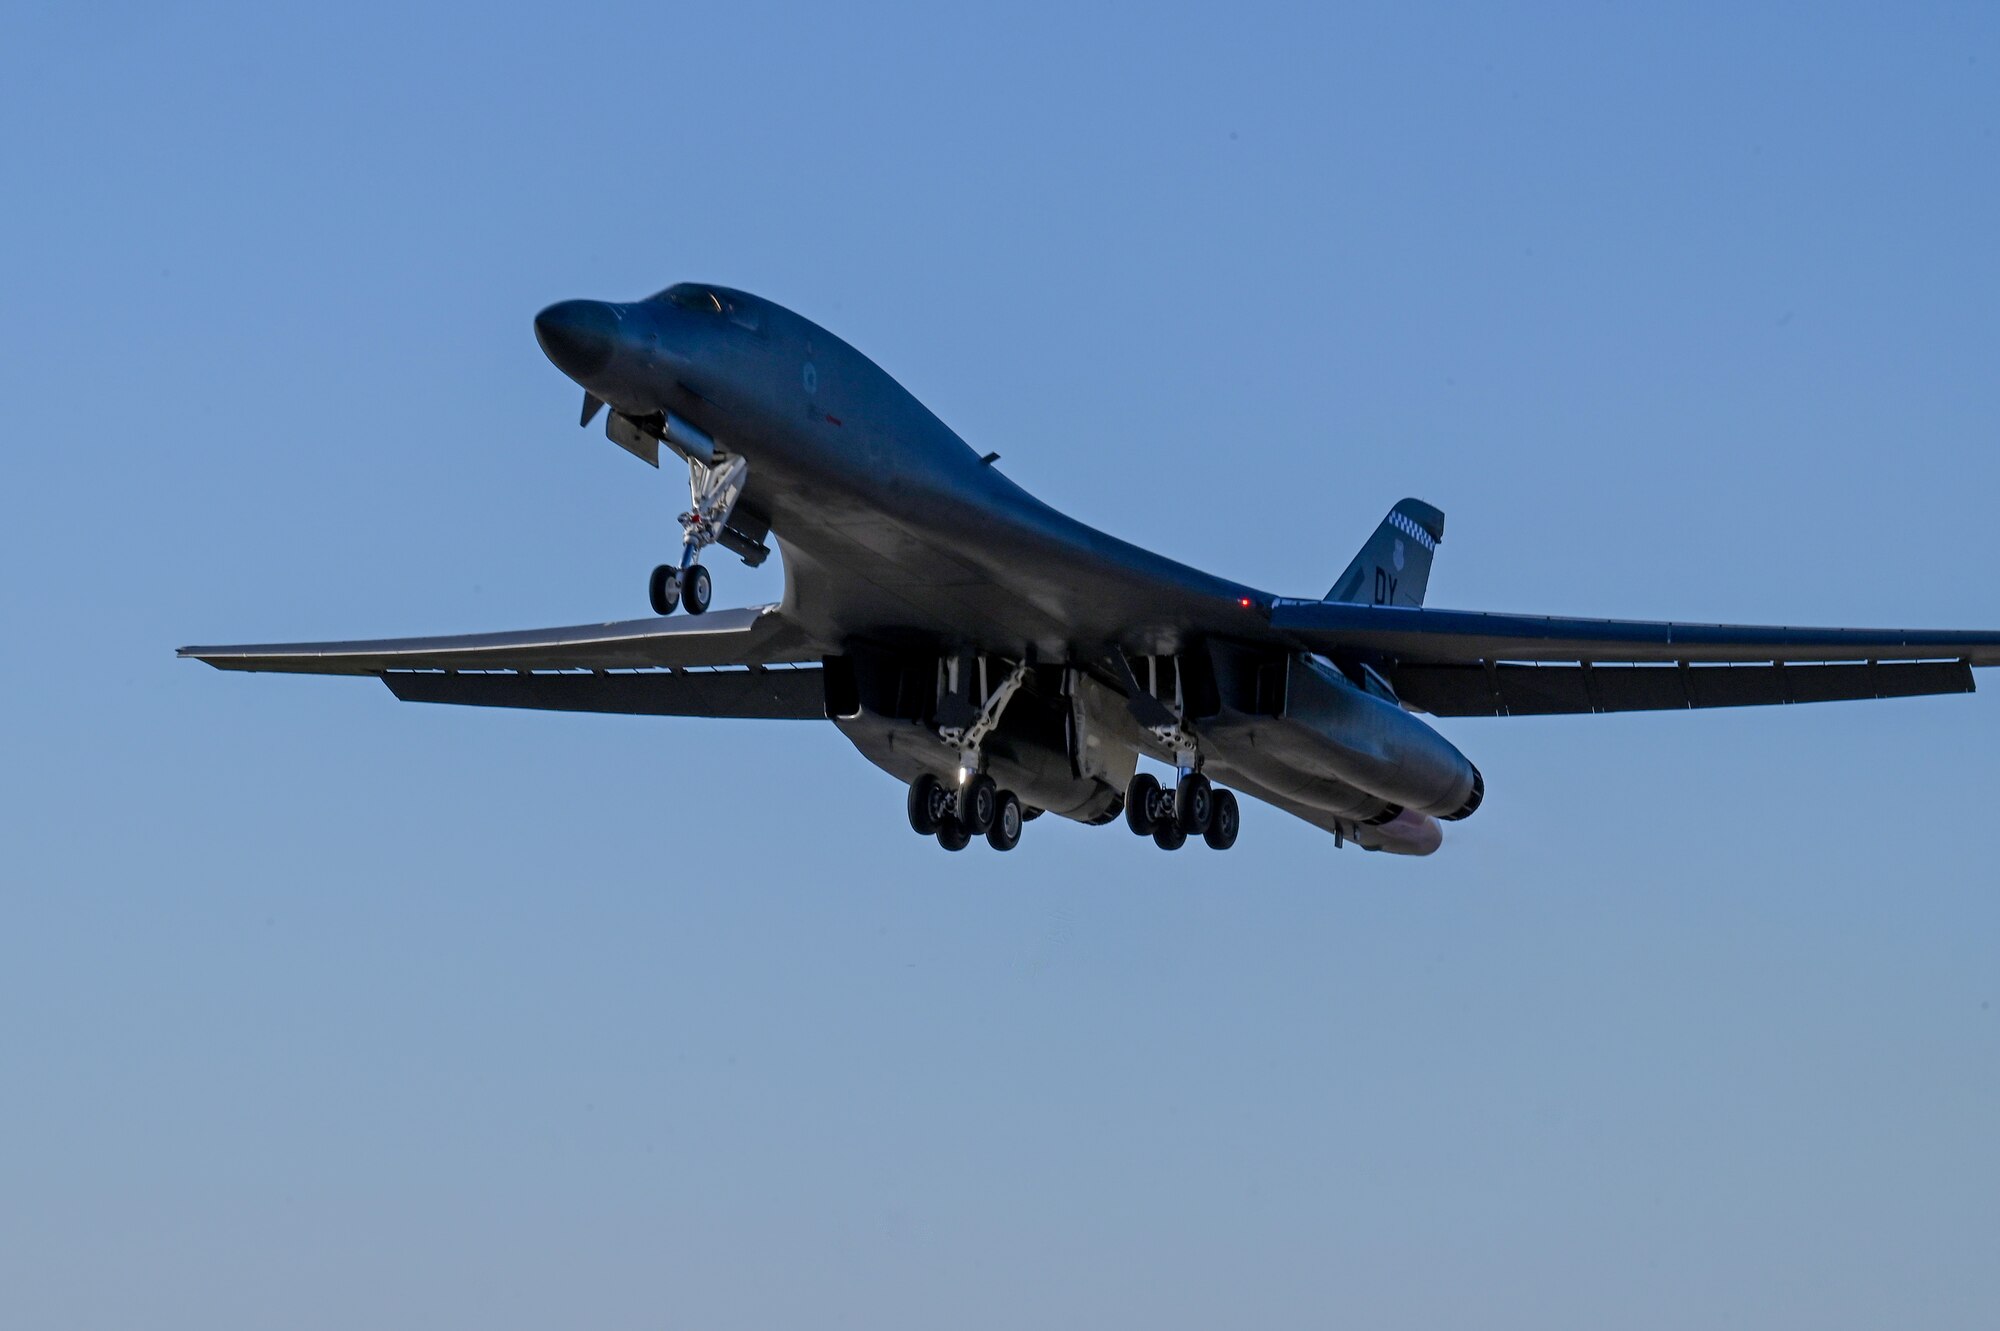 A B-1B Lancer takes off from Dyess Air Force Base, Texas, Oct. 11, 2023, to kick off a U.S. European Command Bomber Task Force deployment. Given the inherent speed, flexibility, and range of strategic bombers, Bomber Task Force missions highlight U.S. capabilities to work closely with our allies and partners to any potential adversary. (U.S. Air Force photo by Senior Airman Sophia Robello)